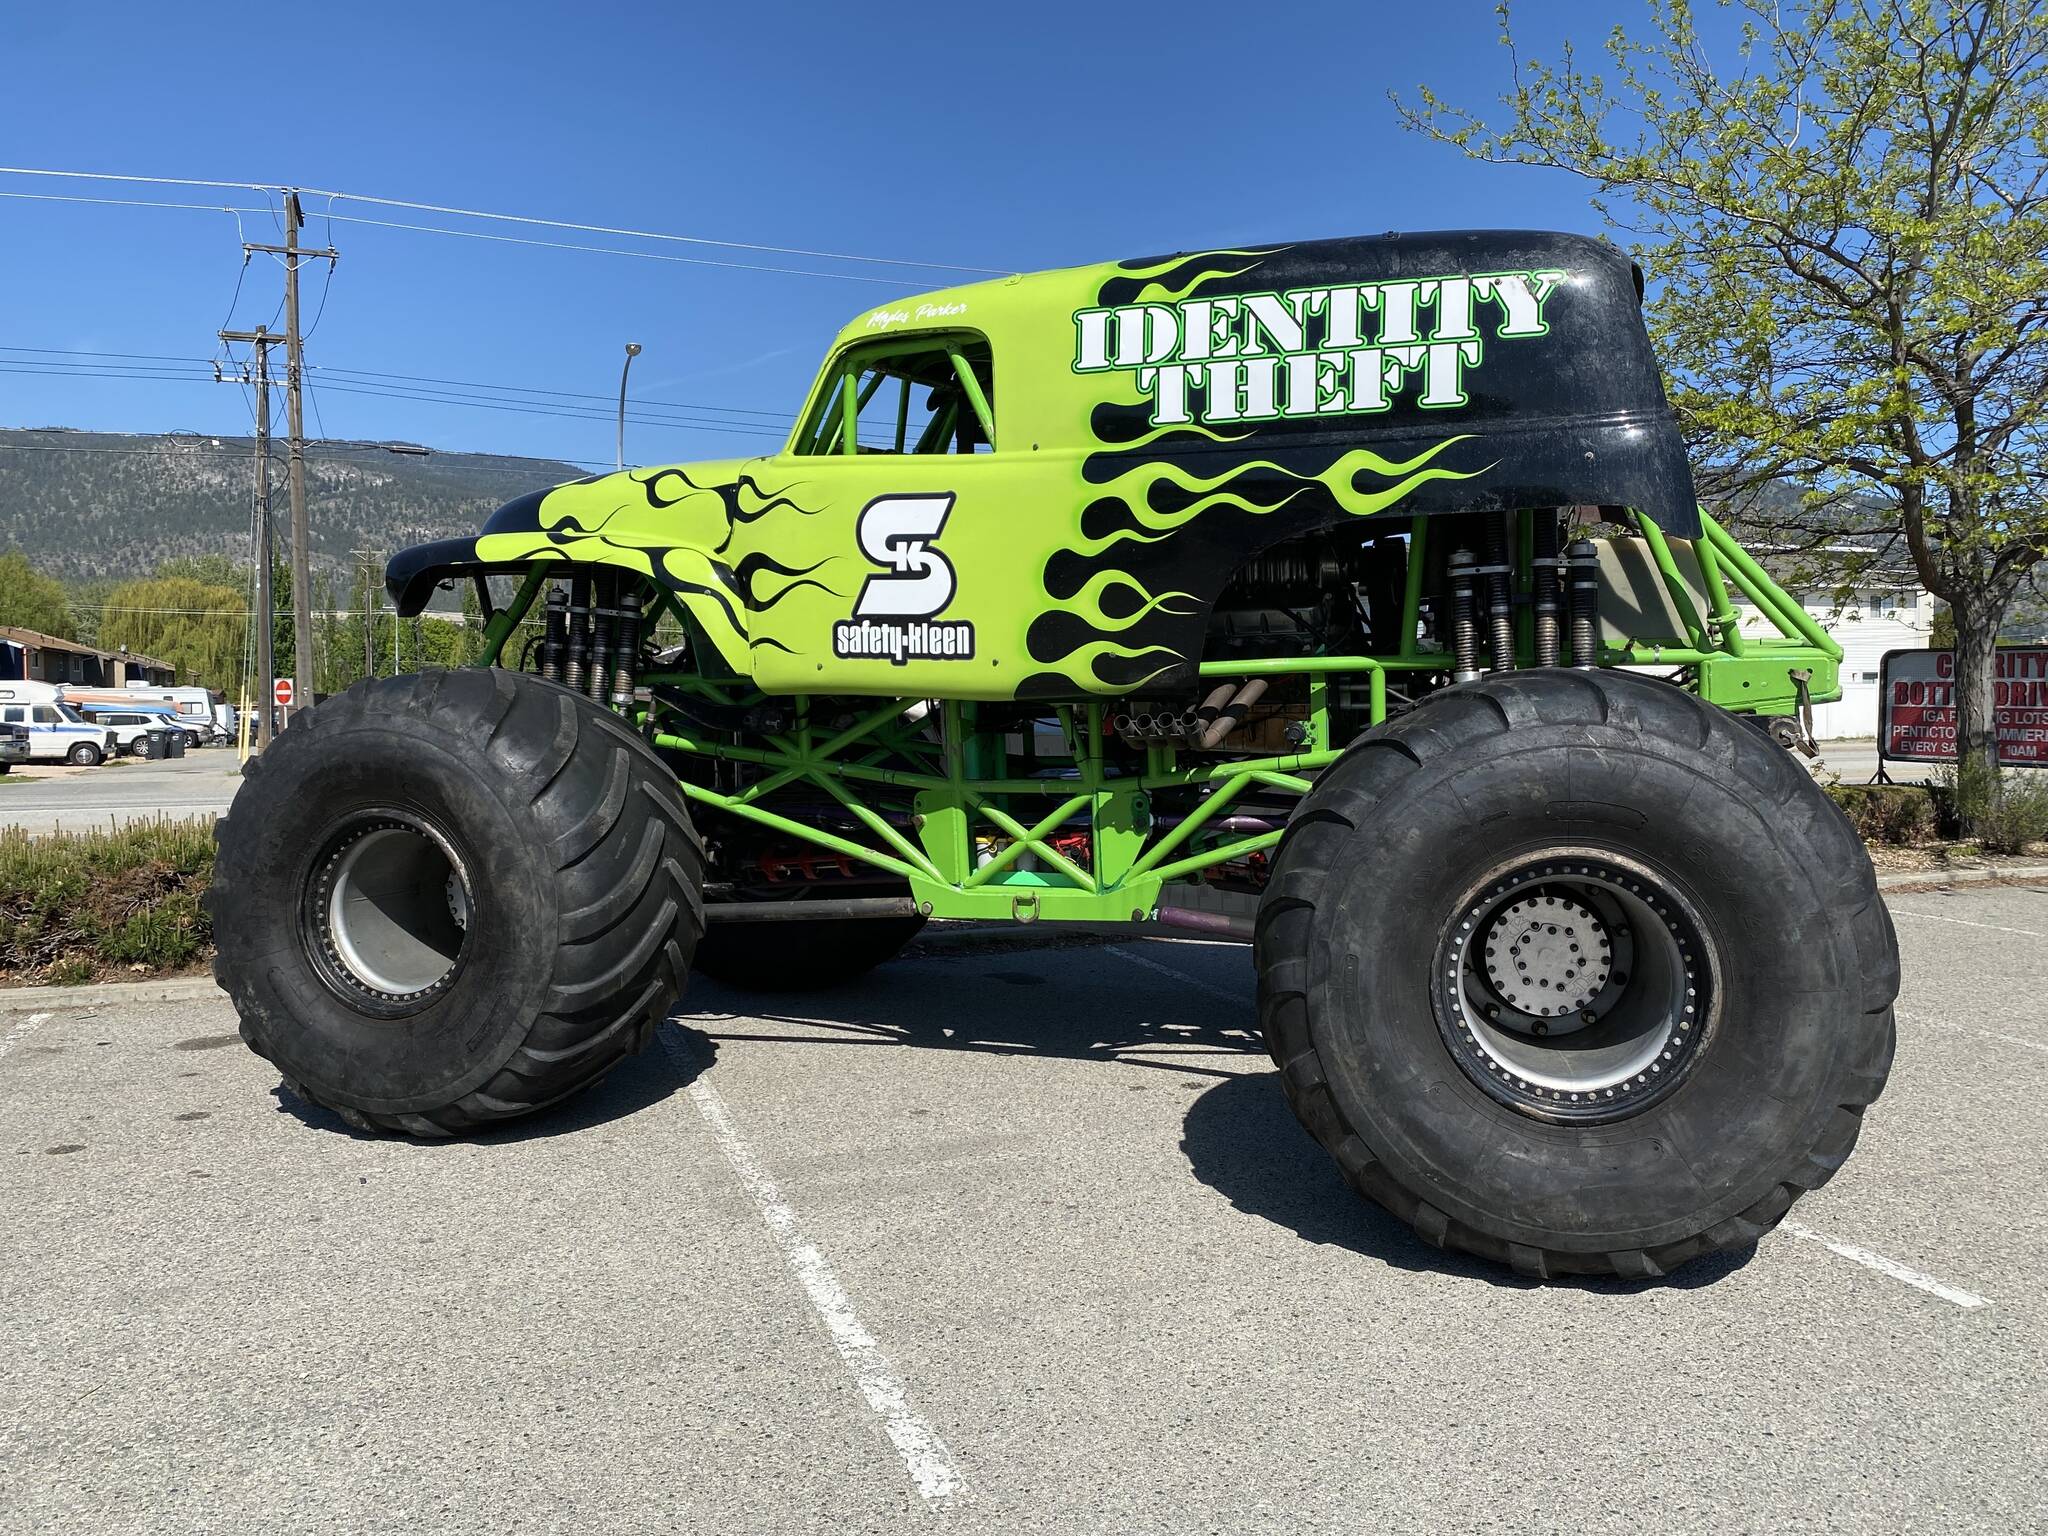 Look what's back in town: 'Malicious' monster trucks on display in  Penticton - Penticton Western News